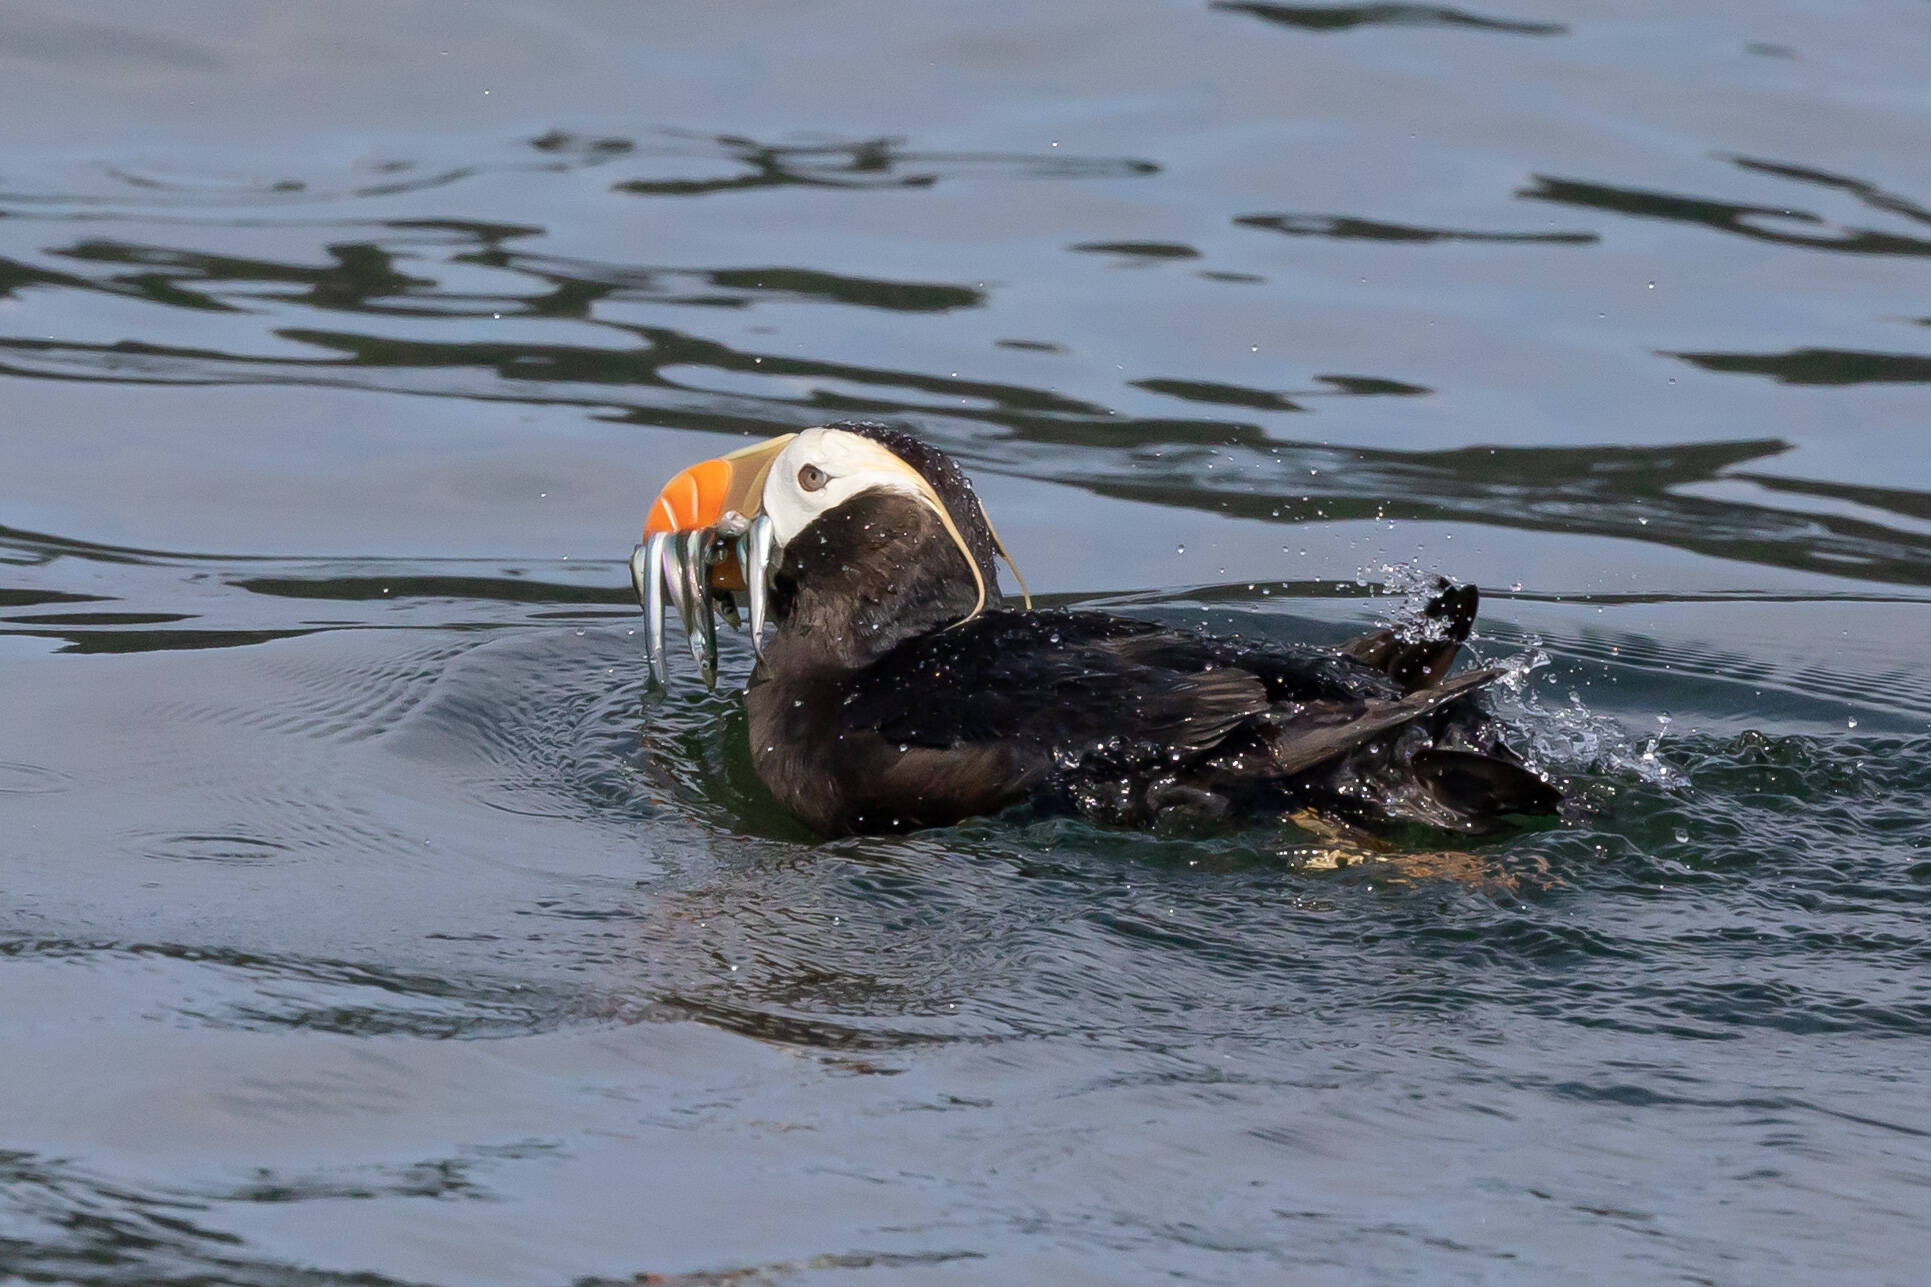 Photo courtesy of Scott Pearson
A tufted puffin can hold many fish in its beak with a raspy tongue before carrying them to its cliffside burrows to feed its puffling. Both parents take turns raising the single puffling. If the puffling dies, the mother does not have the capacity to lay another egg that year, according to Peter Hodum, professor at the University of Puget Sound.